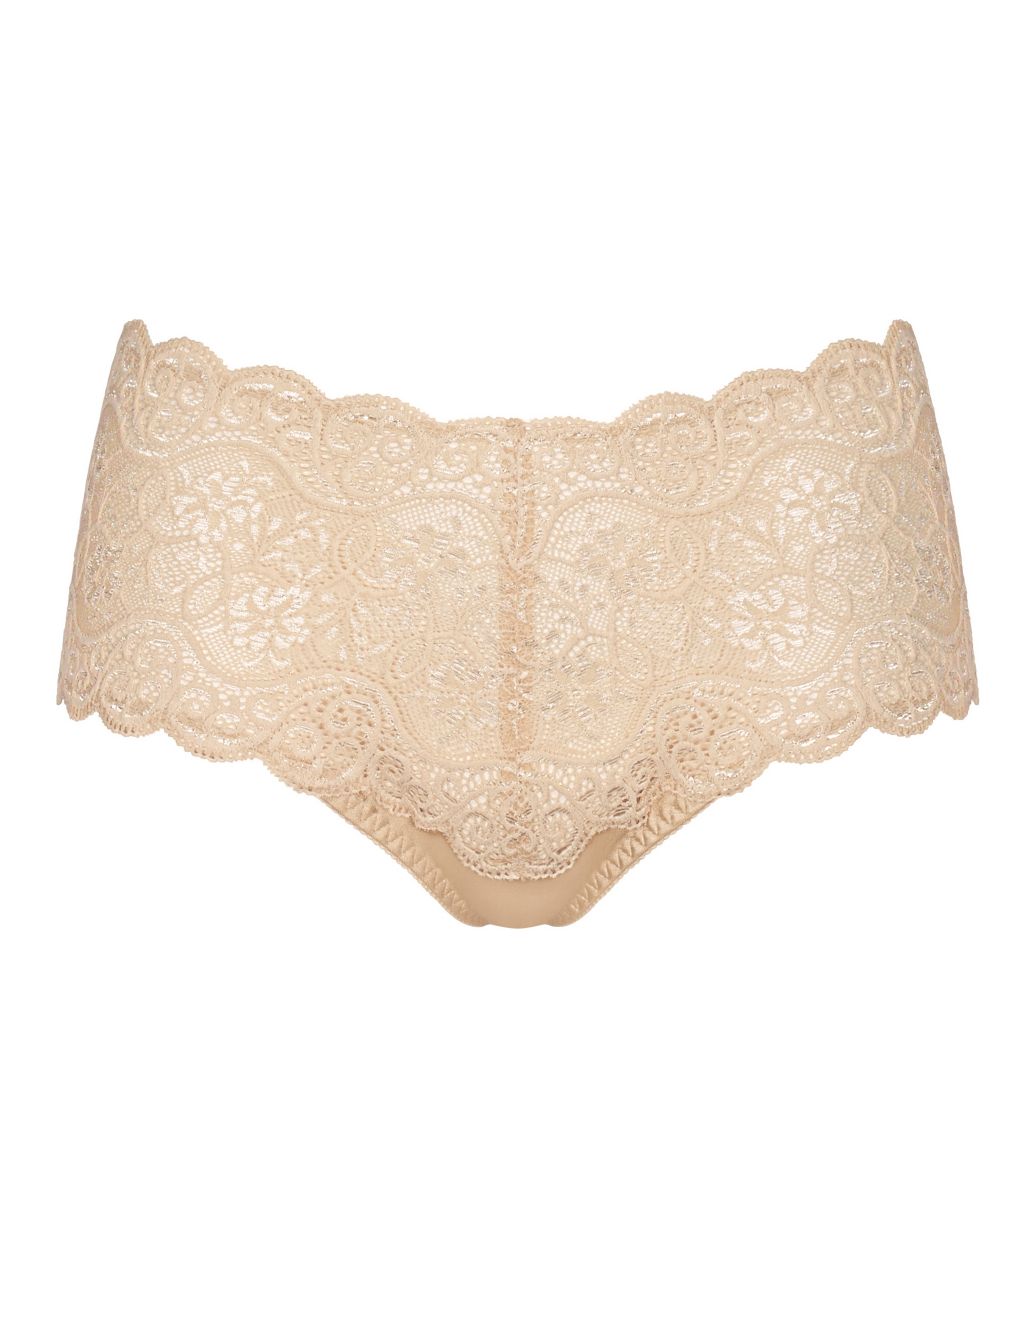 Amourette 300 All Over Lace Full Briefs image 2